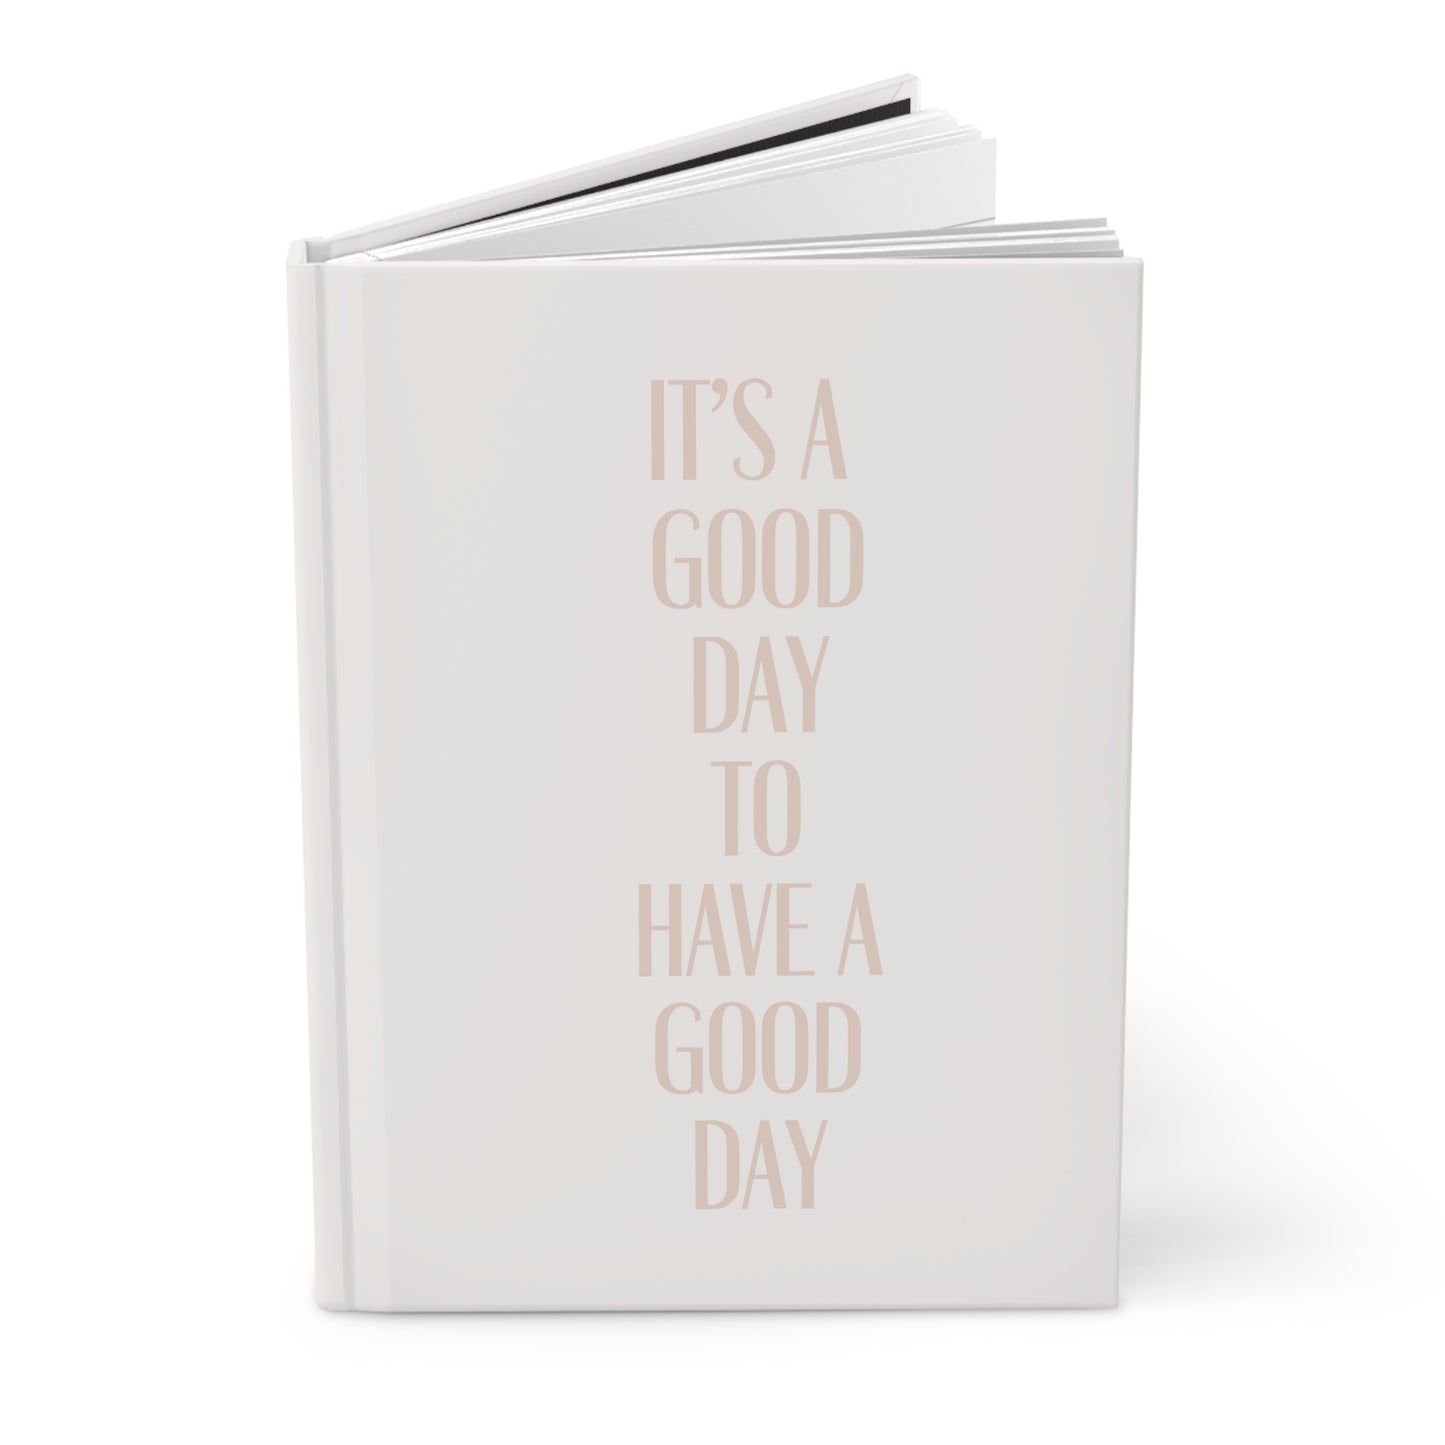 It's a Good Day to have a Good Day Hardcover Journal